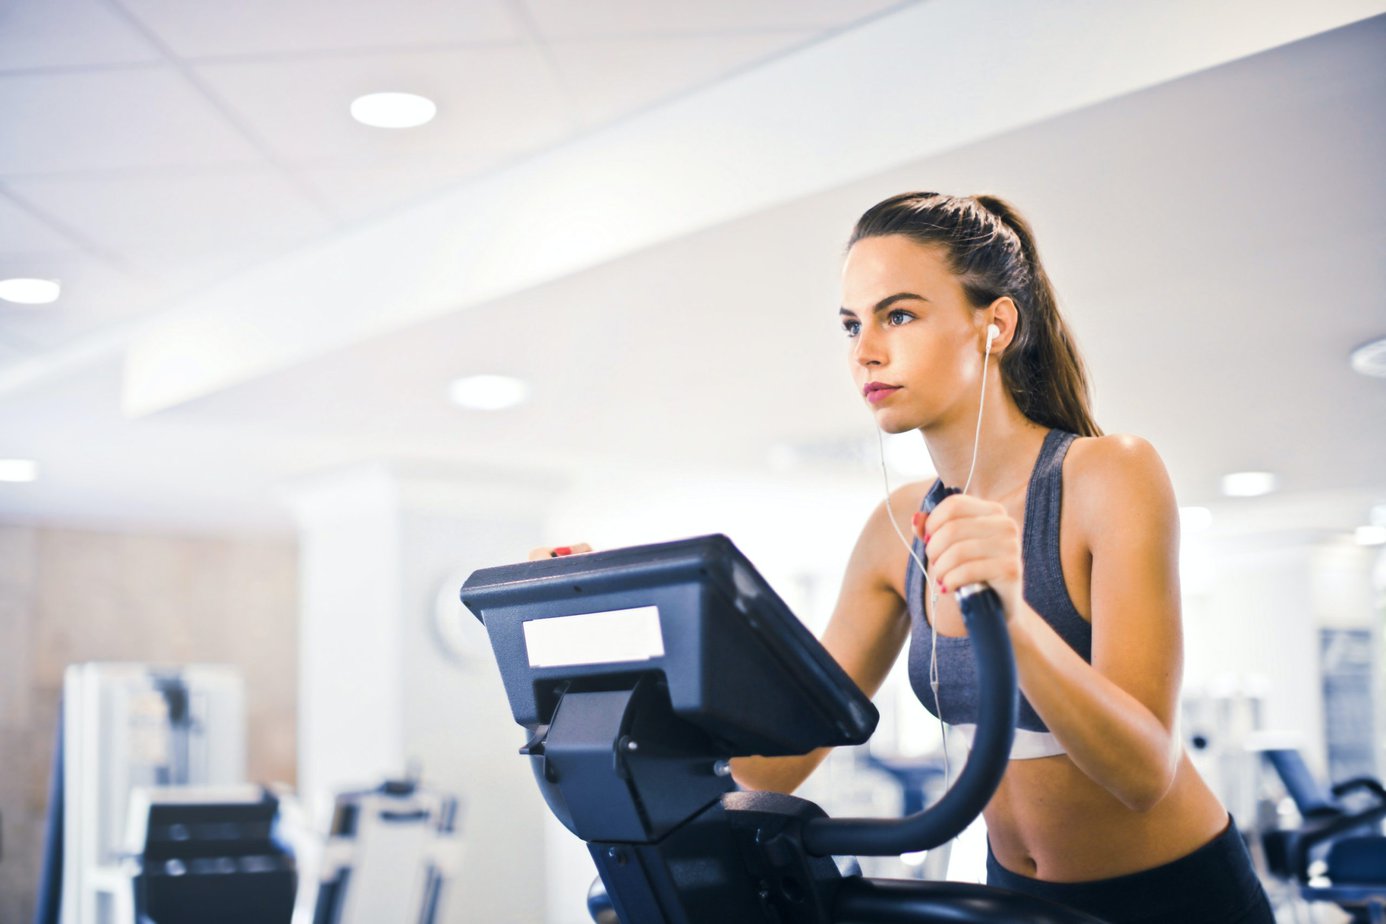 Getting Started with Cardio Training: The Benefits and Cardio Accessories for Gym